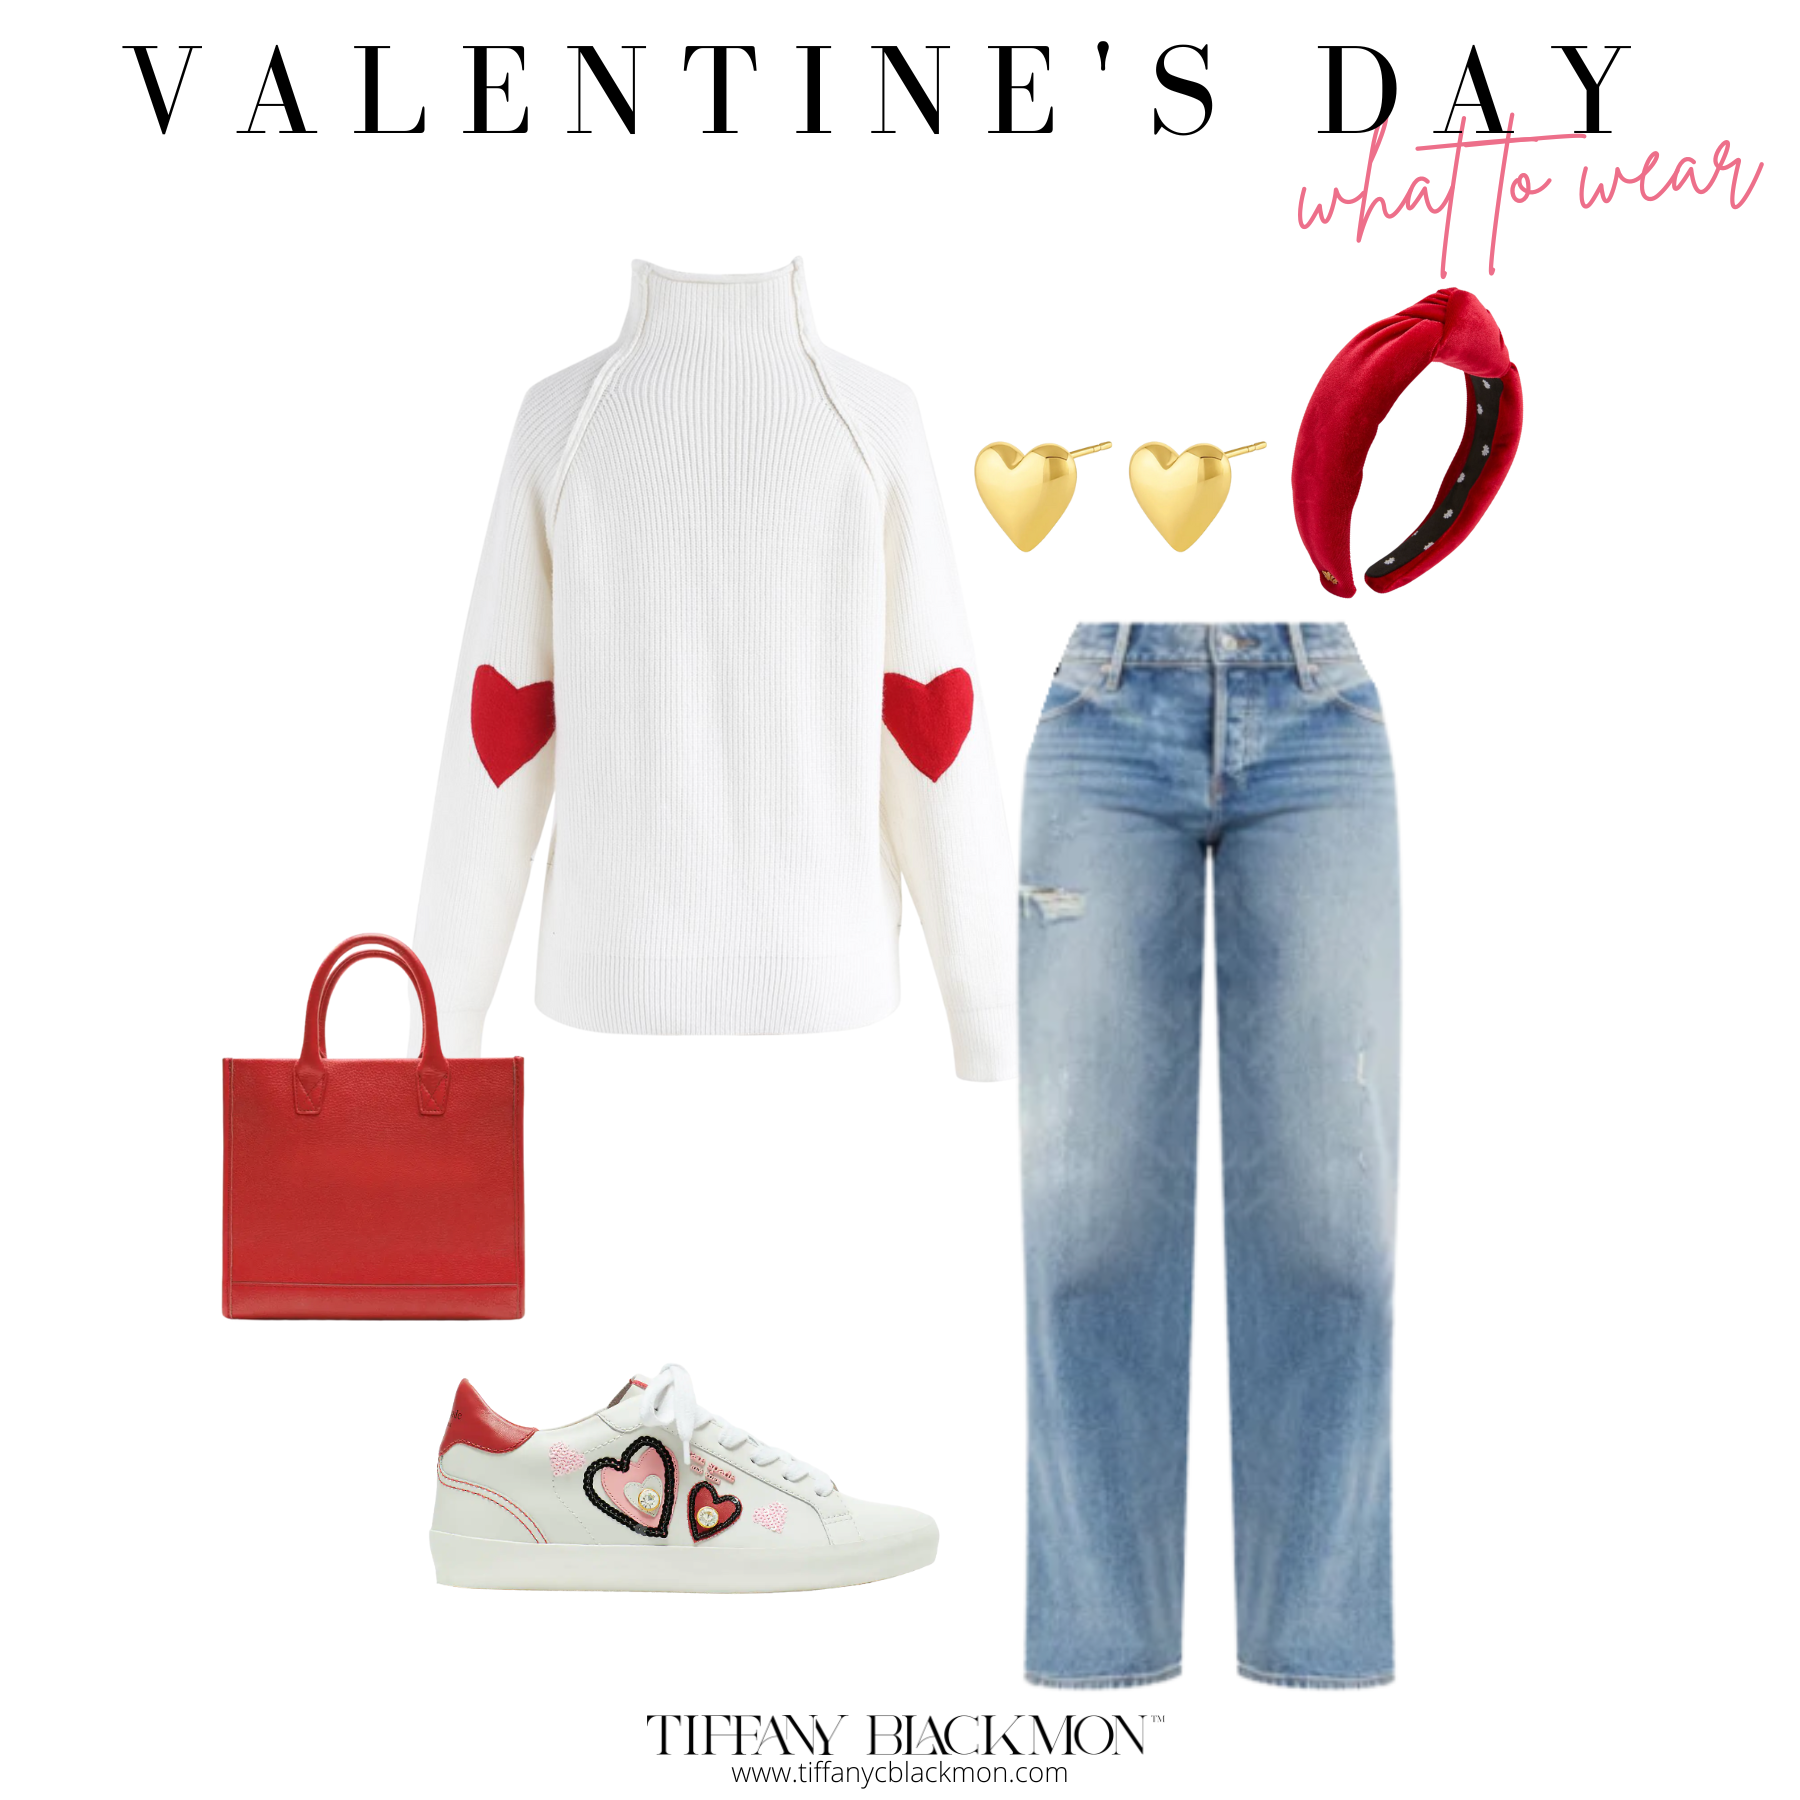 Valentine's Day: What to Wear
#heart #sweater #red #jeans #denim #heartearrings #shoes #sneakers #accessories #headband #purse